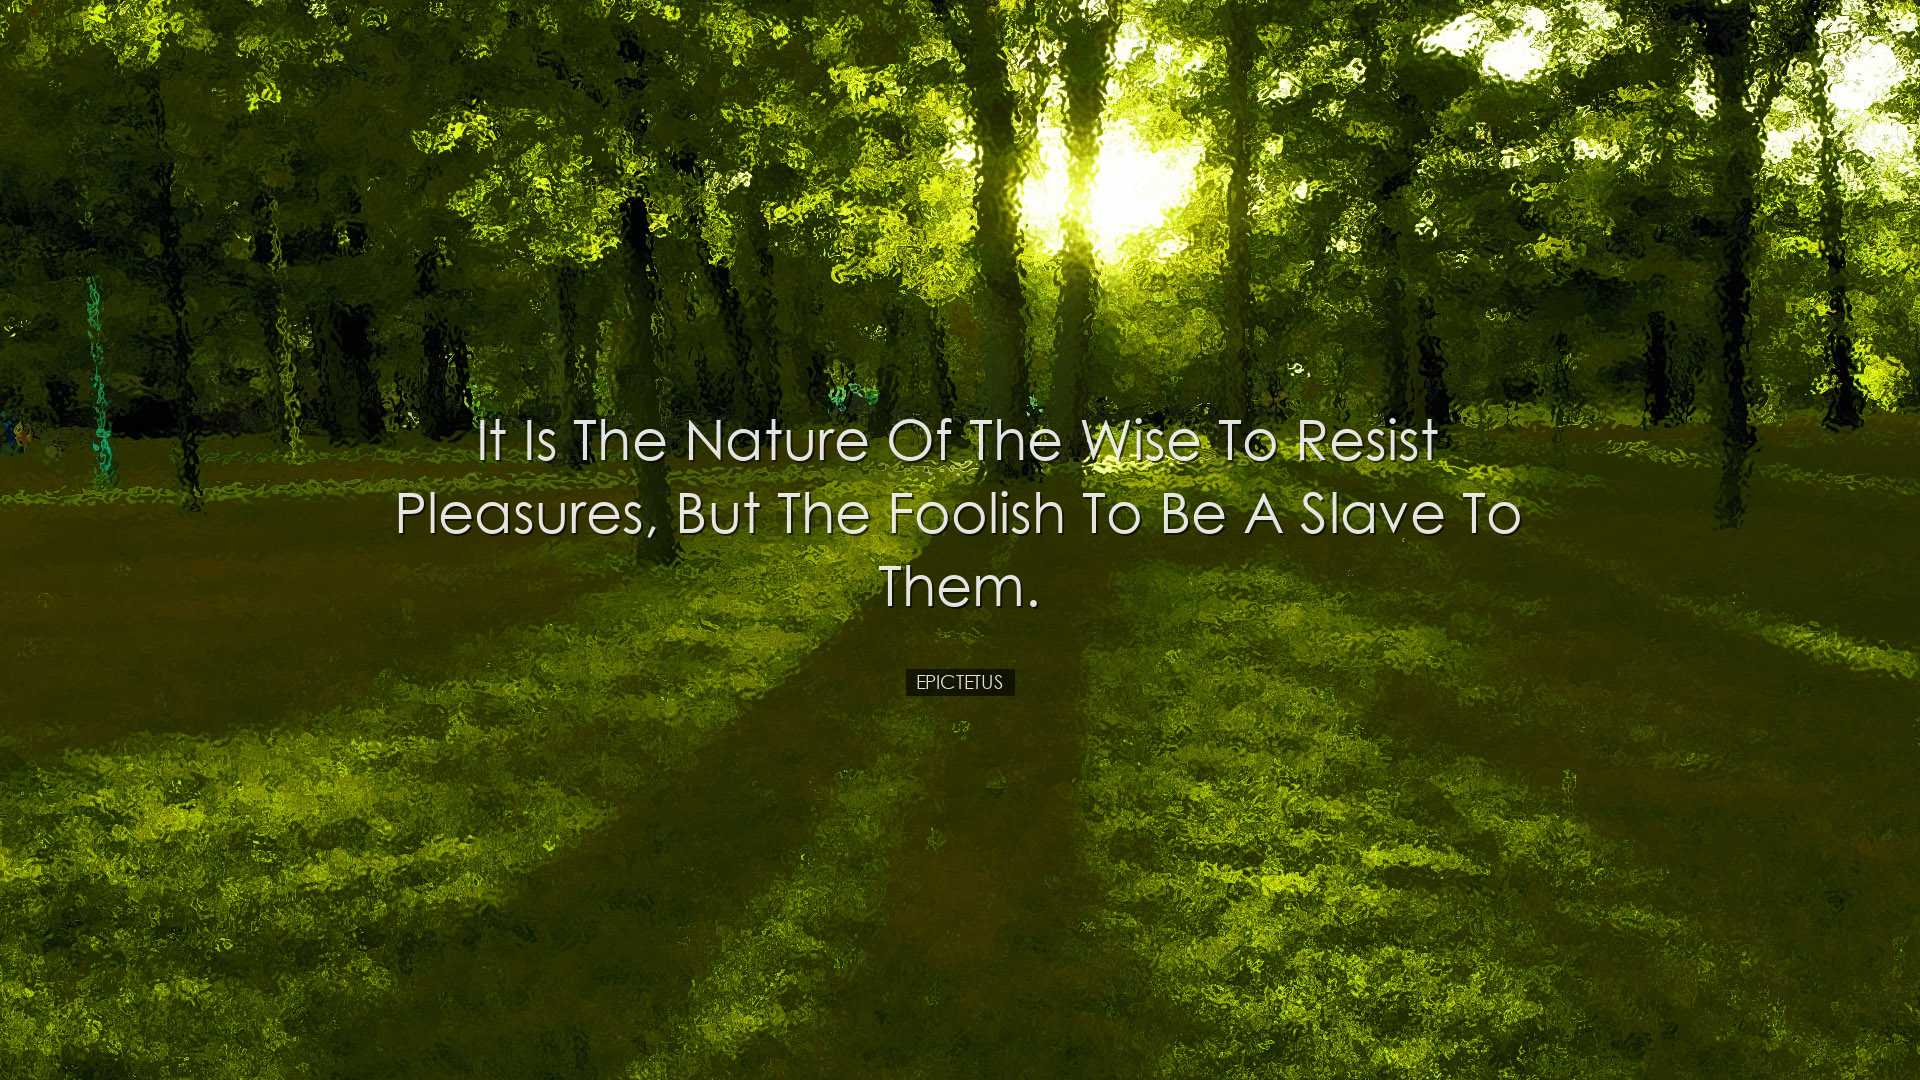 It is the nature of the wise to resist pleasures, but the foolish